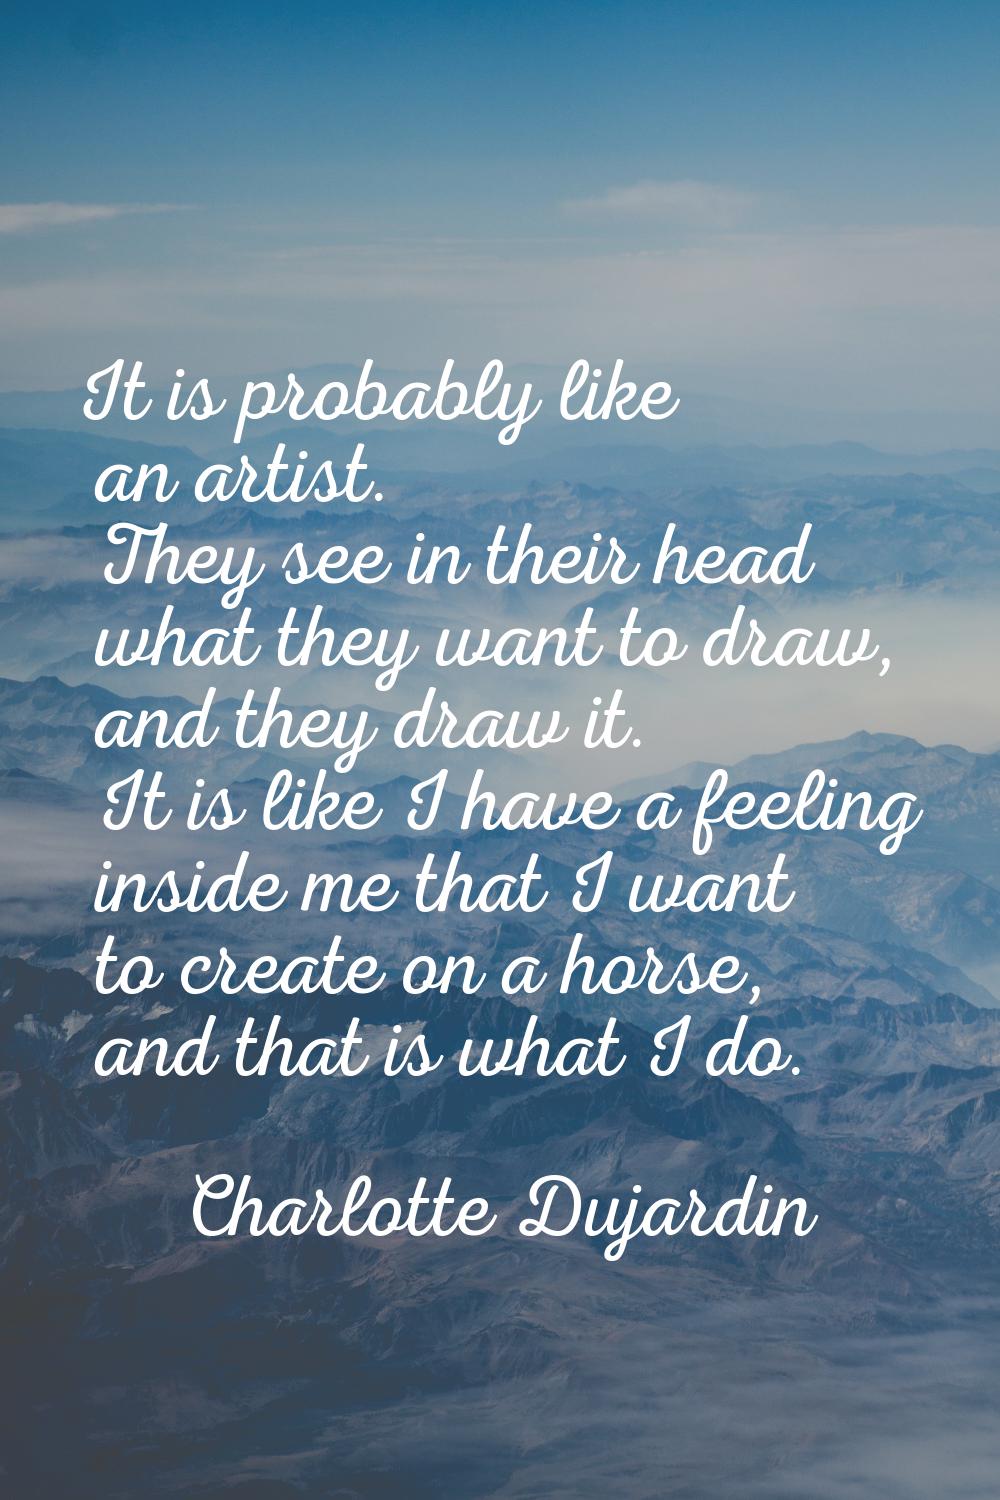 It is probably like an artist. They see in their head what they want to draw, and they draw it. It 